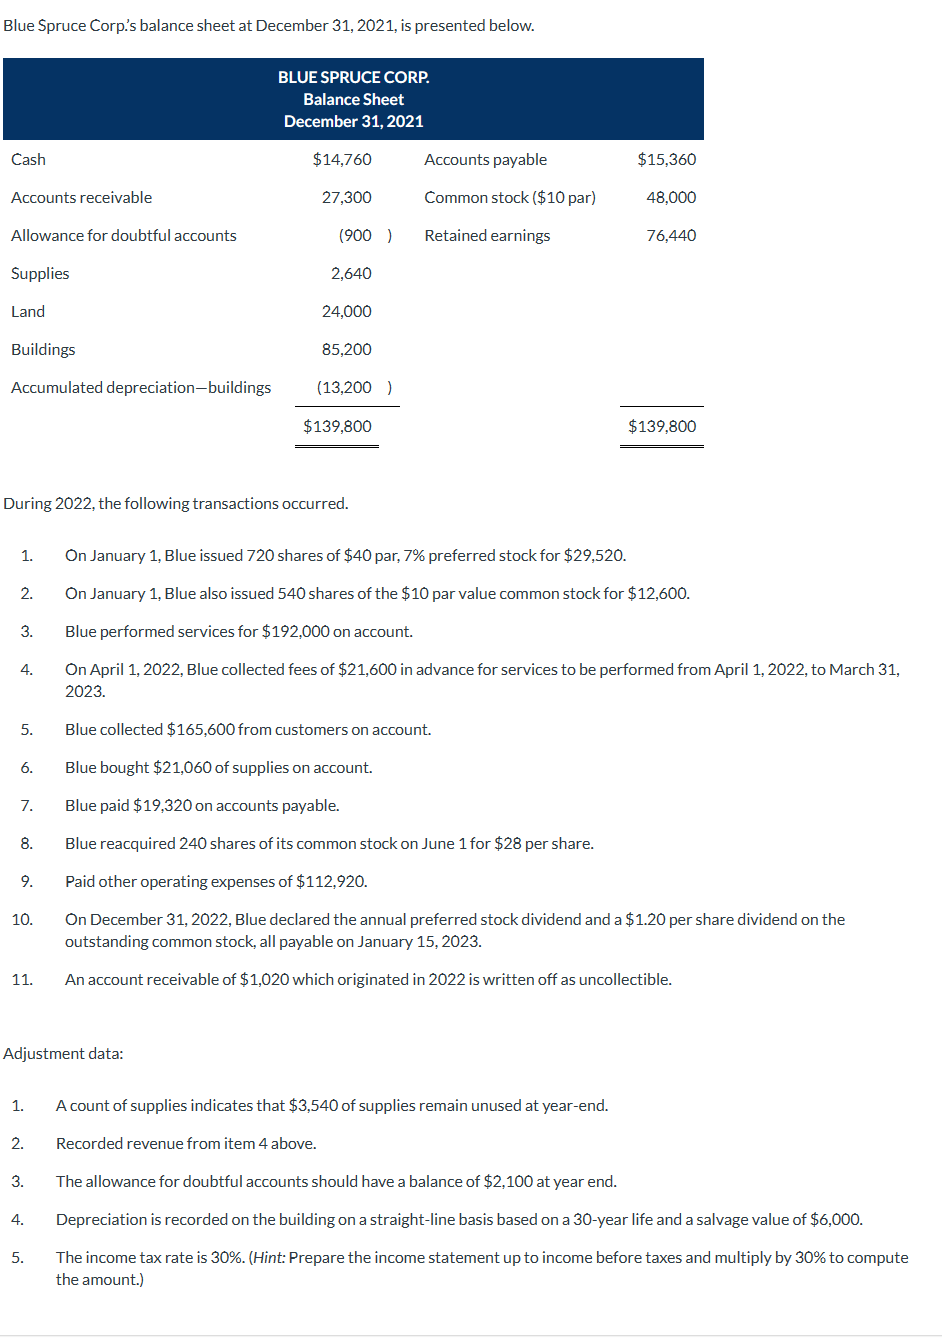 Blue Spruce Corp.'s balance sheet at December 31, 2021, is presented below.
BLUE SPRUCE CORP.
Balance Sheet
December 31, 2021
Cash
Accounts receivable
$14,760
Accounts payable
$15,360
27,300
Common stock ($10 par)
48,000
Allowance for doubtful accounts
(900)
Retained earnings
76,440
Supplies
2,640
Land
24,000
Buildings
85,200
Accumulated depreciation-buildings
(13,200 )
$139,800
$139,800
During 2022, the following transactions occurred.
1.
On January 1, Blue issued 720 shares of $40 par, 7% preferred stock for $29,520.
2.
On January 1, Blue also issued 540 shares of the $10 par value common stock for $12,600.
3.
Blue performed services for $192,000 on account.
4.
On April 1, 2022, Blue collected fees of $21,600 in advance for services to be performed from April 1, 2022, to March 31,
2023.
5.
Blue collected $165,600 from customers on account.
6.
Blue bought $21,060 of supplies on account.
7.
Blue paid $19,320 on accounts payable.
8.
Blue reacquired 240 shares of its common stock on June 1 for $28 per share.
9.
Paid other operating expenses of $112,920.
10.
On December 31, 2022, Blue declared the annual preferred stock dividend and a $1.20 per share dividend on the
outstanding common stock, all payable on January 15, 2023.
11.
An account receivable of $1,020 which originated in 2022 is written off as uncollectible.
Adjustment data:
1.
A count of supplies indicates that $3,540 of supplies remain unused at year-end.
2.
Recorded revenue from item 4 above.
3.
The allowance for doubtful accounts should have a balance of $2,100 at year end.
4.
5.
Depreciation is recorded on the building on a straight-line basis based on a 30-year life and a salvage value of $6,000.
The income tax rate is 30%. (Hint: Prepare the income statement up to income before taxes and multiply by 30% to compute
the amount.)